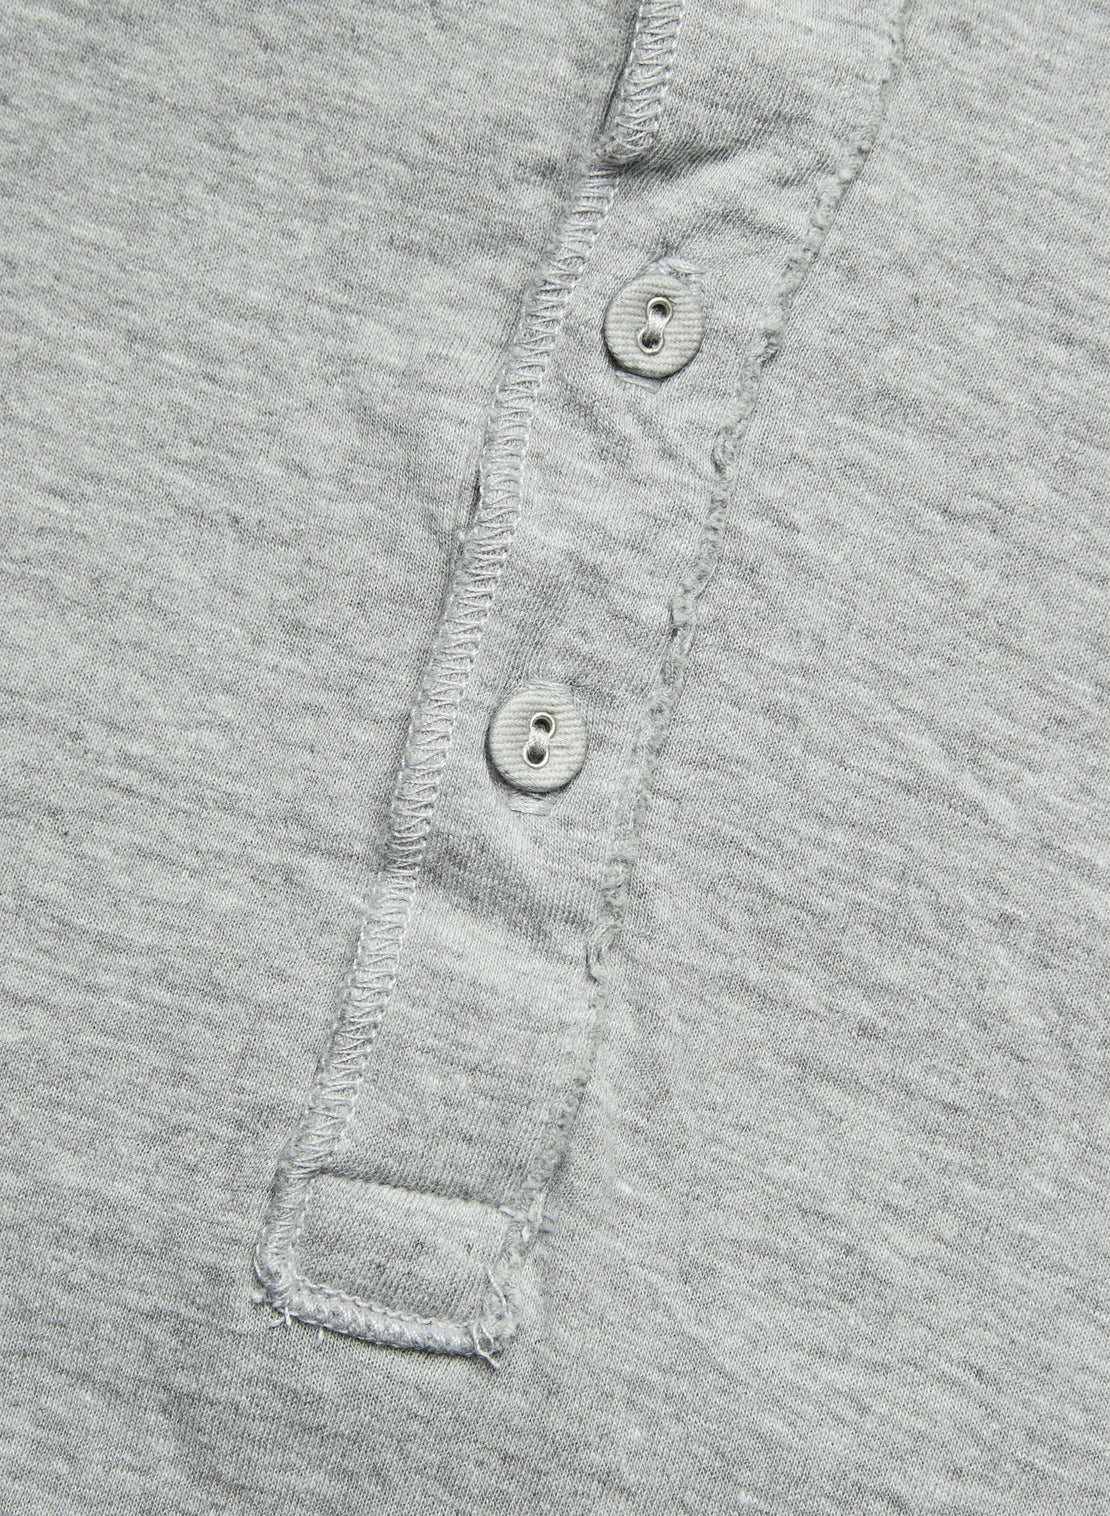 Pointelle Henley - Silver Heather - Save Khaki - STAG Provisions - Tops - L/S Knit